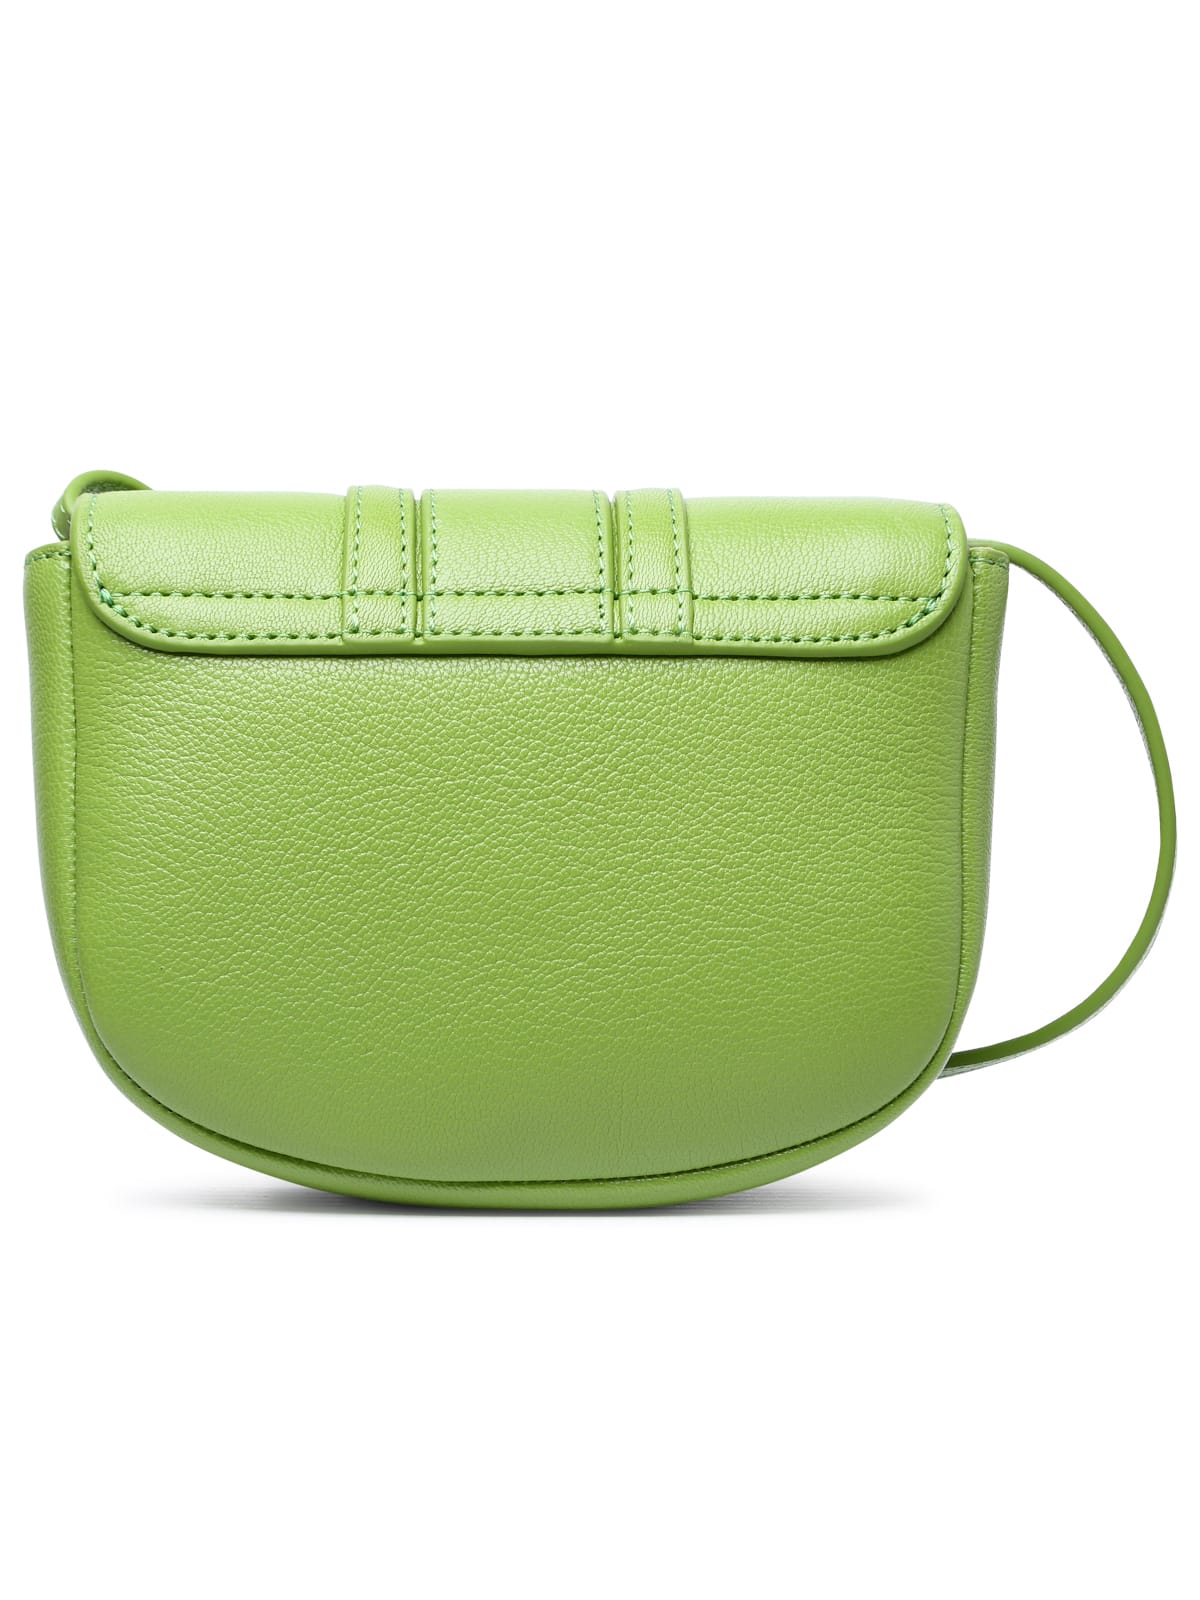 Shop See By Chloé Small Hana Green Leather Bag